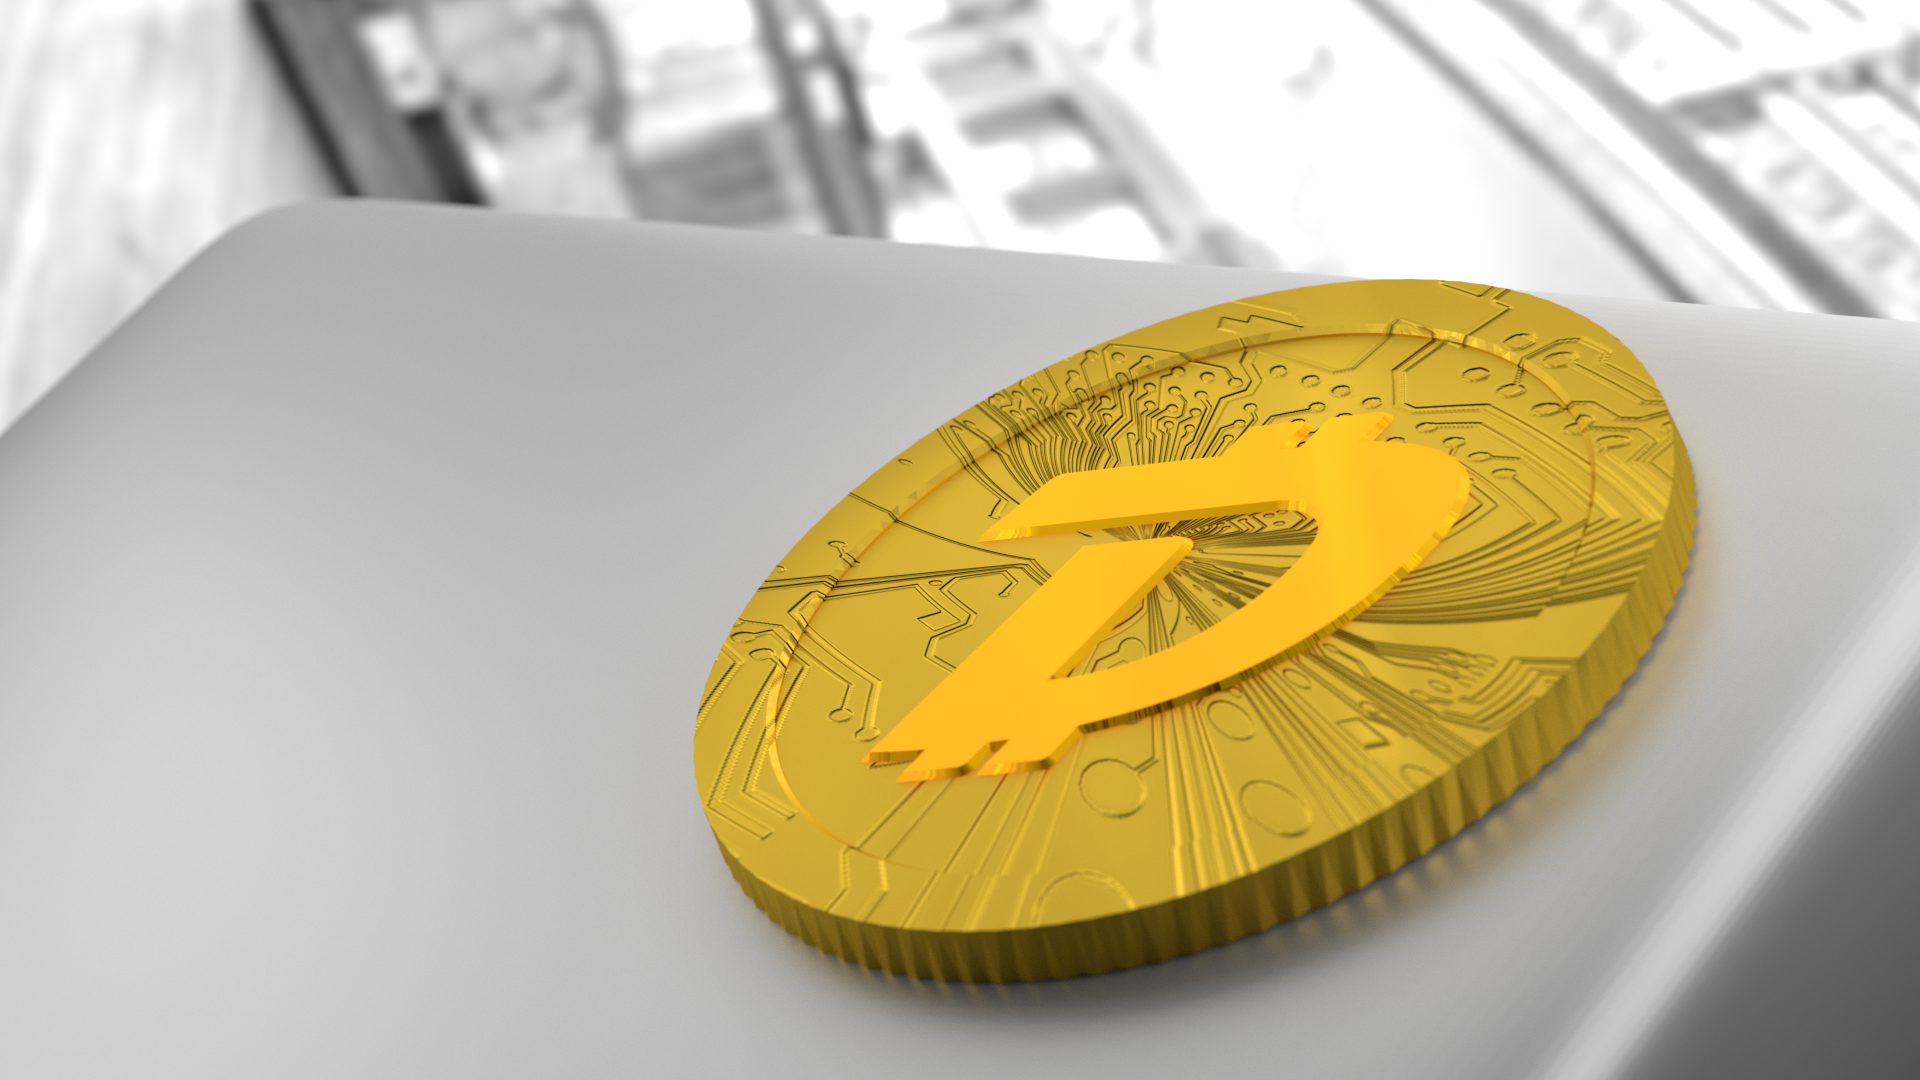 Continuing My Hobby Of Creating Digibyte 3d Image Here Is